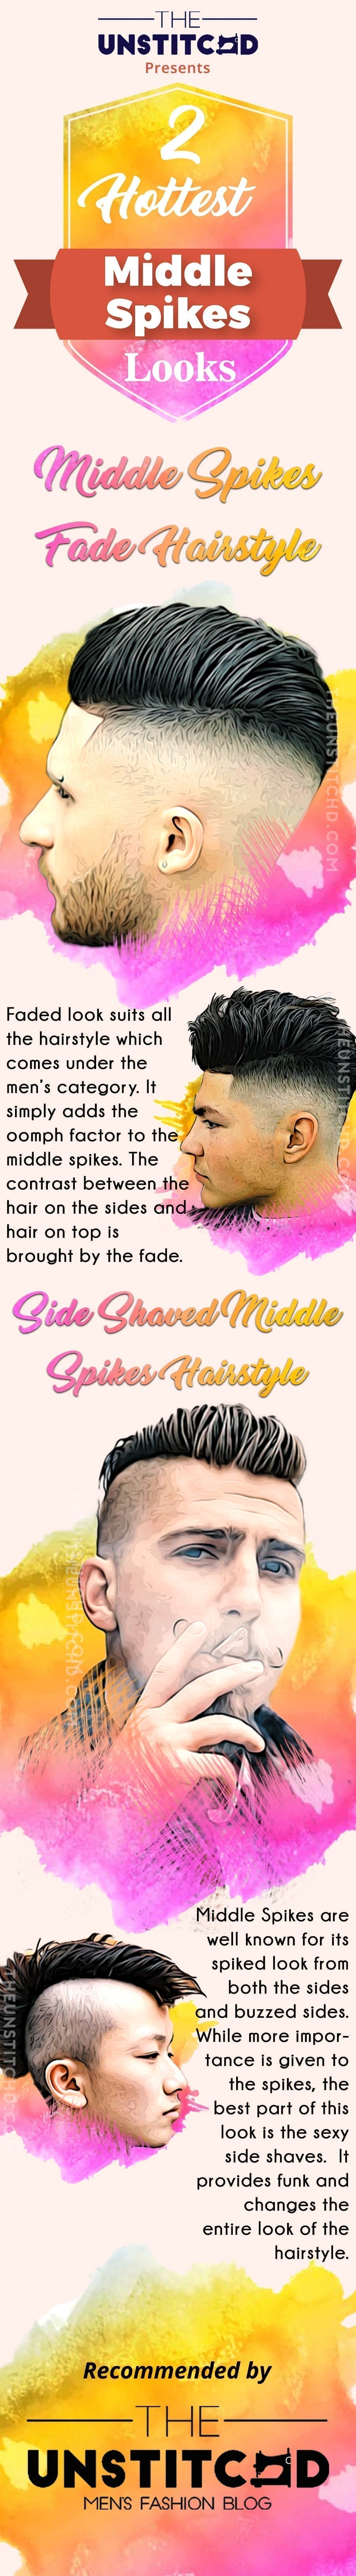 Middle-spikes-hairstyle-info